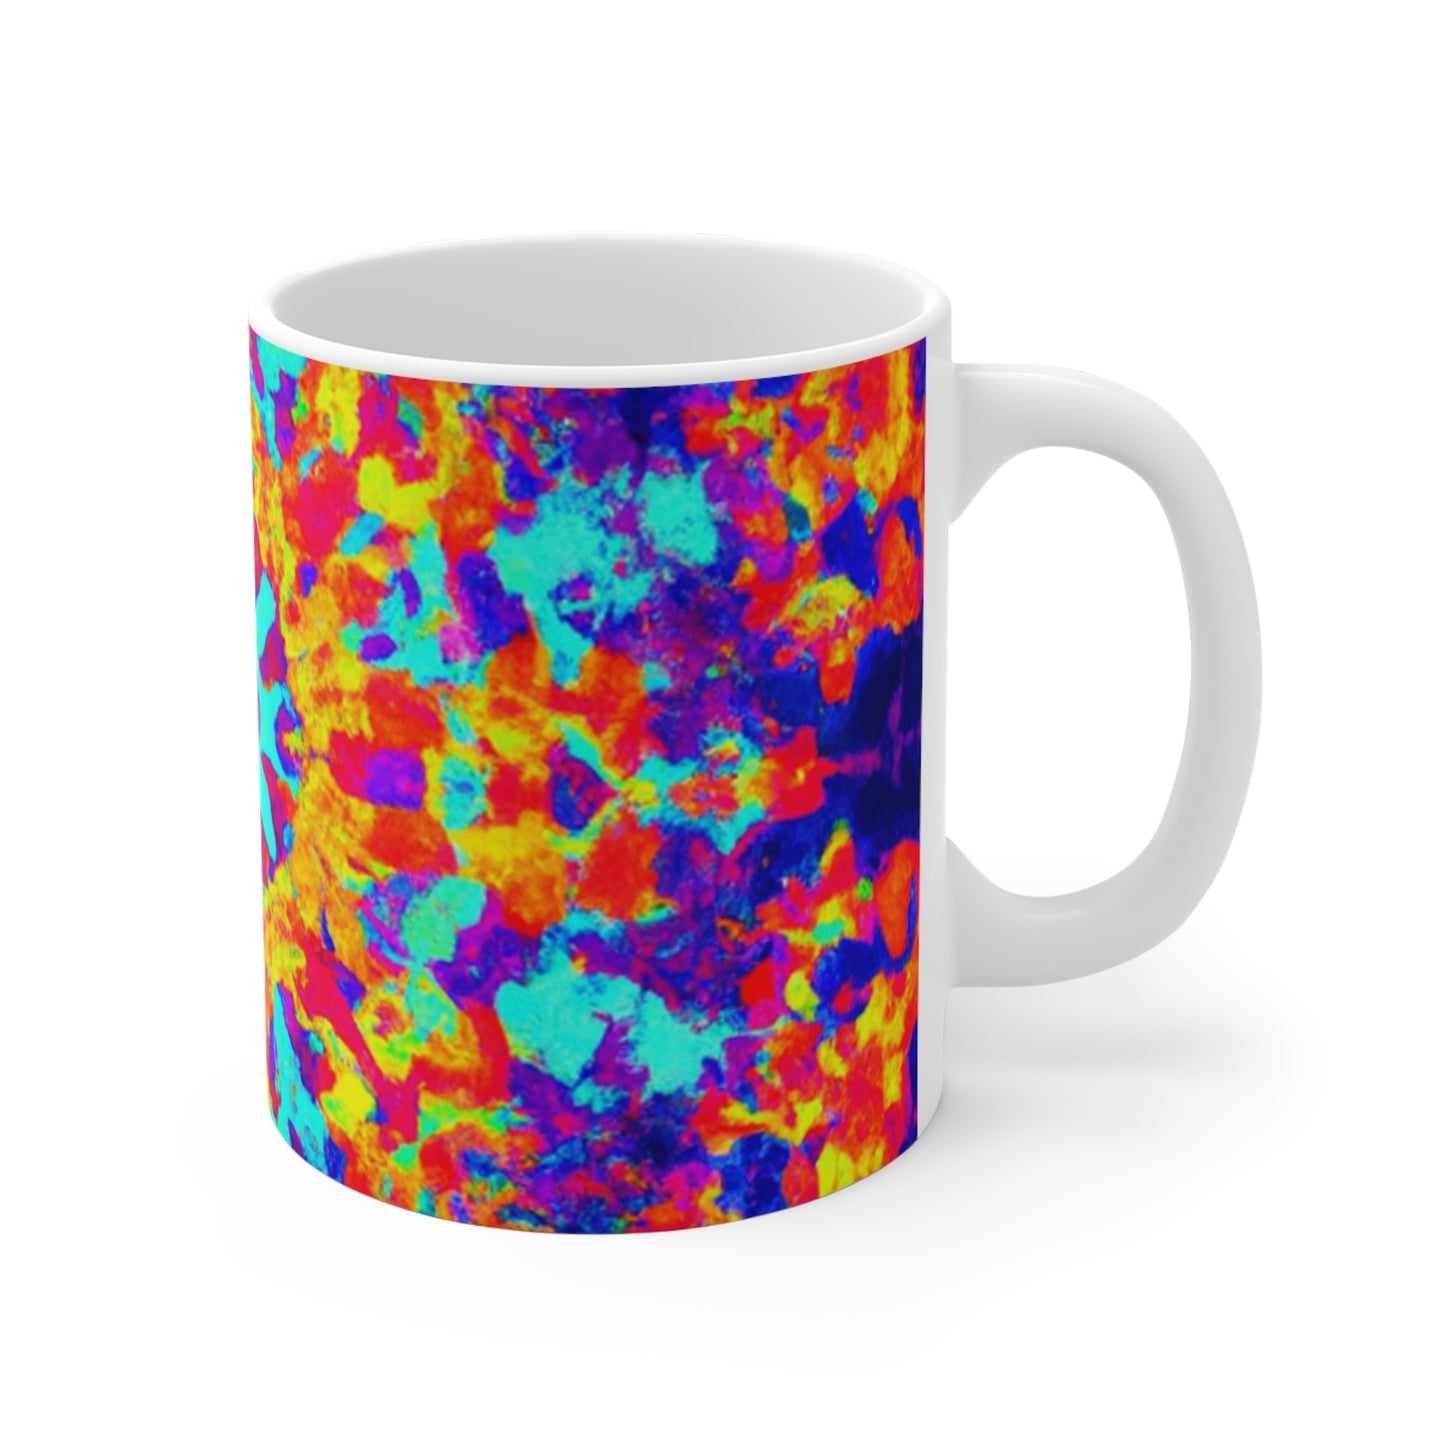 Peppermint Patty's Perc-O-Lator - Psychedelic Coffee Cup Mug 11 Ounce